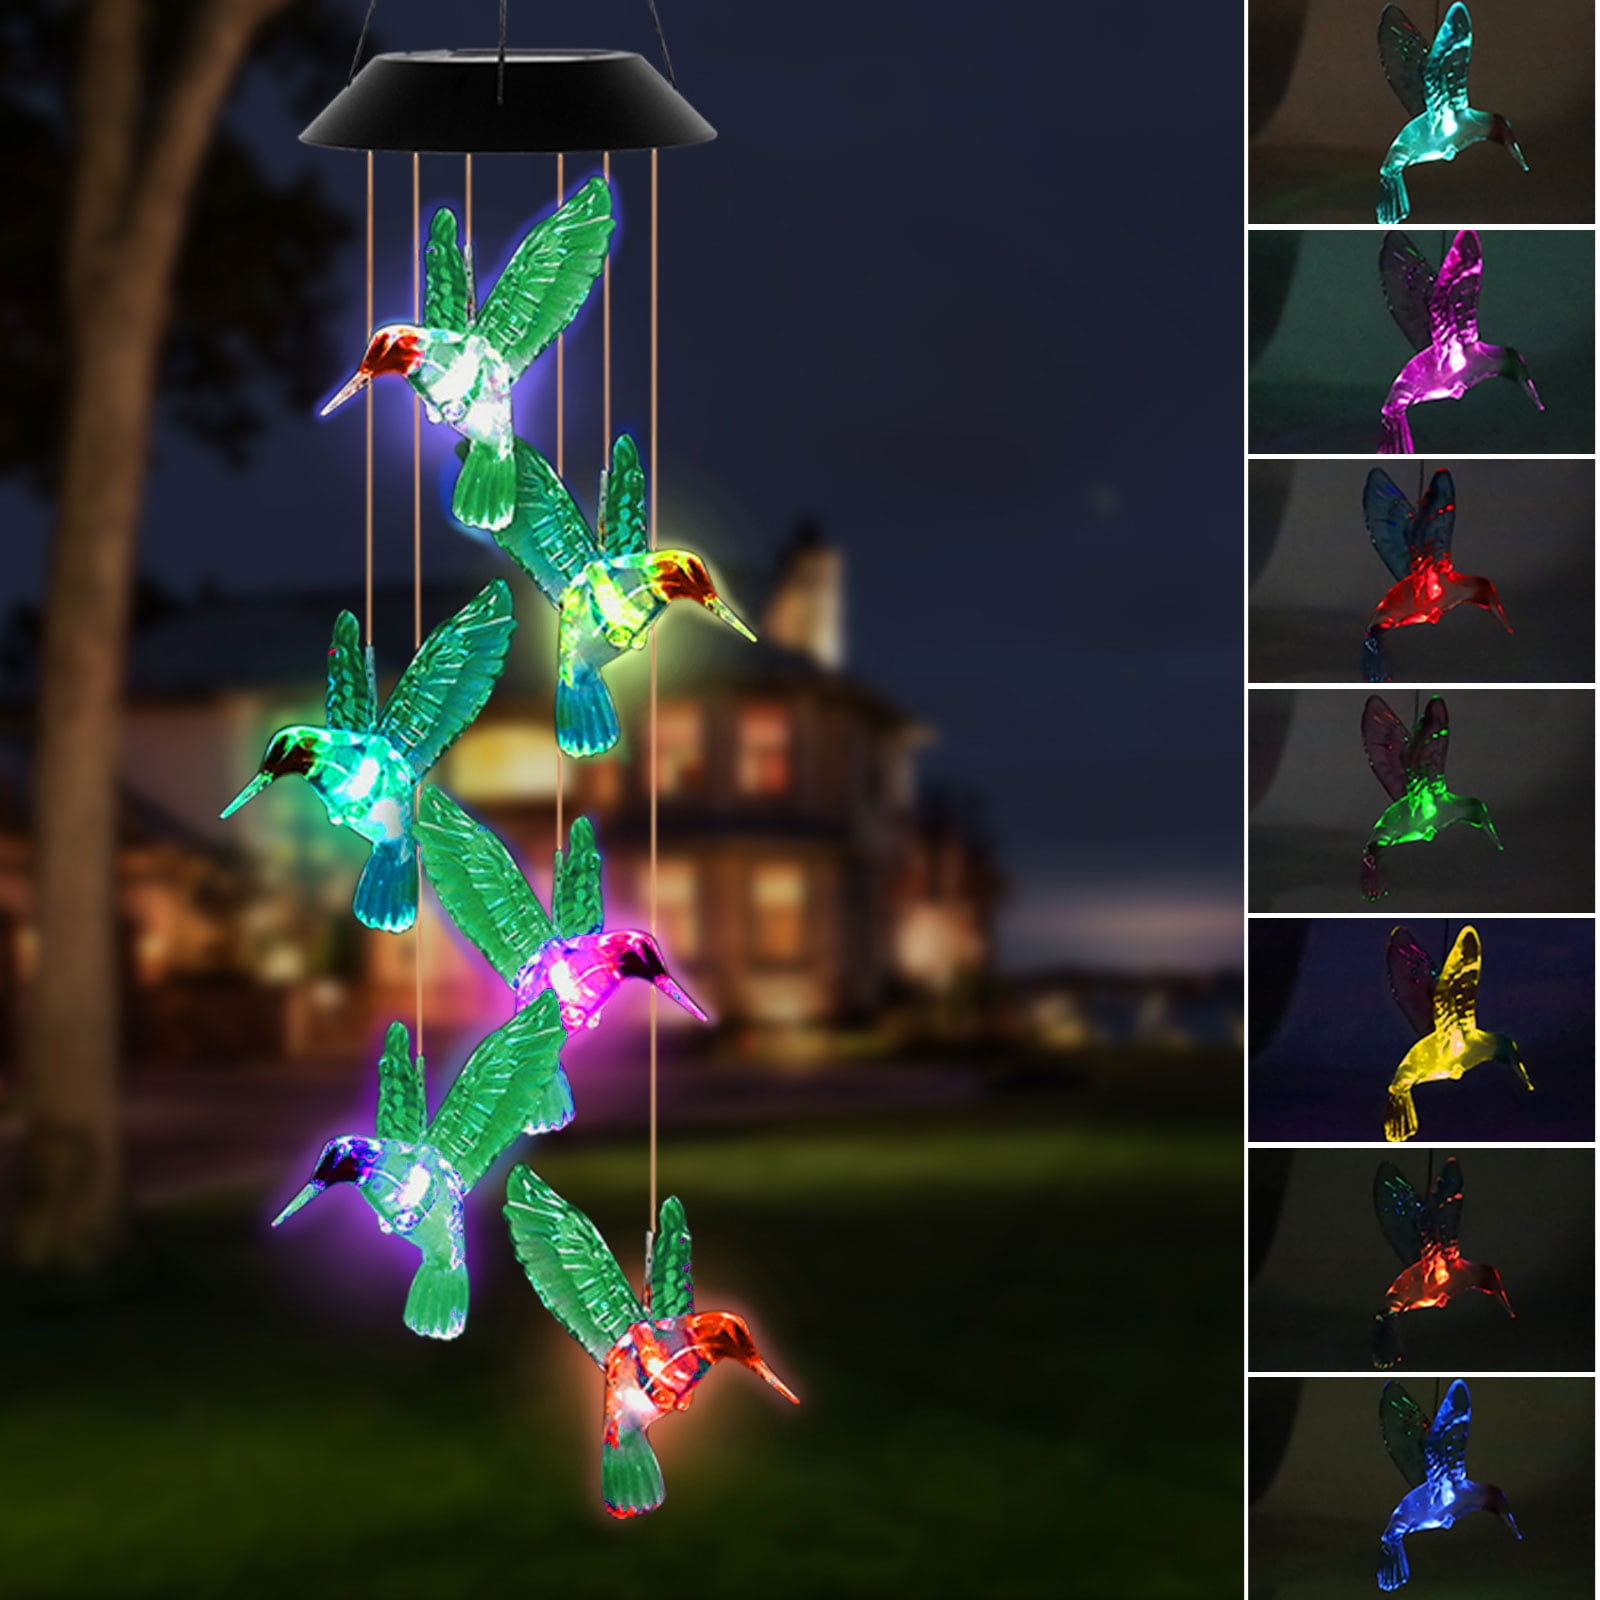 LED Hummingbird Wind Chime Solar Powered Lights Color-Changing Yard Garden Decor 